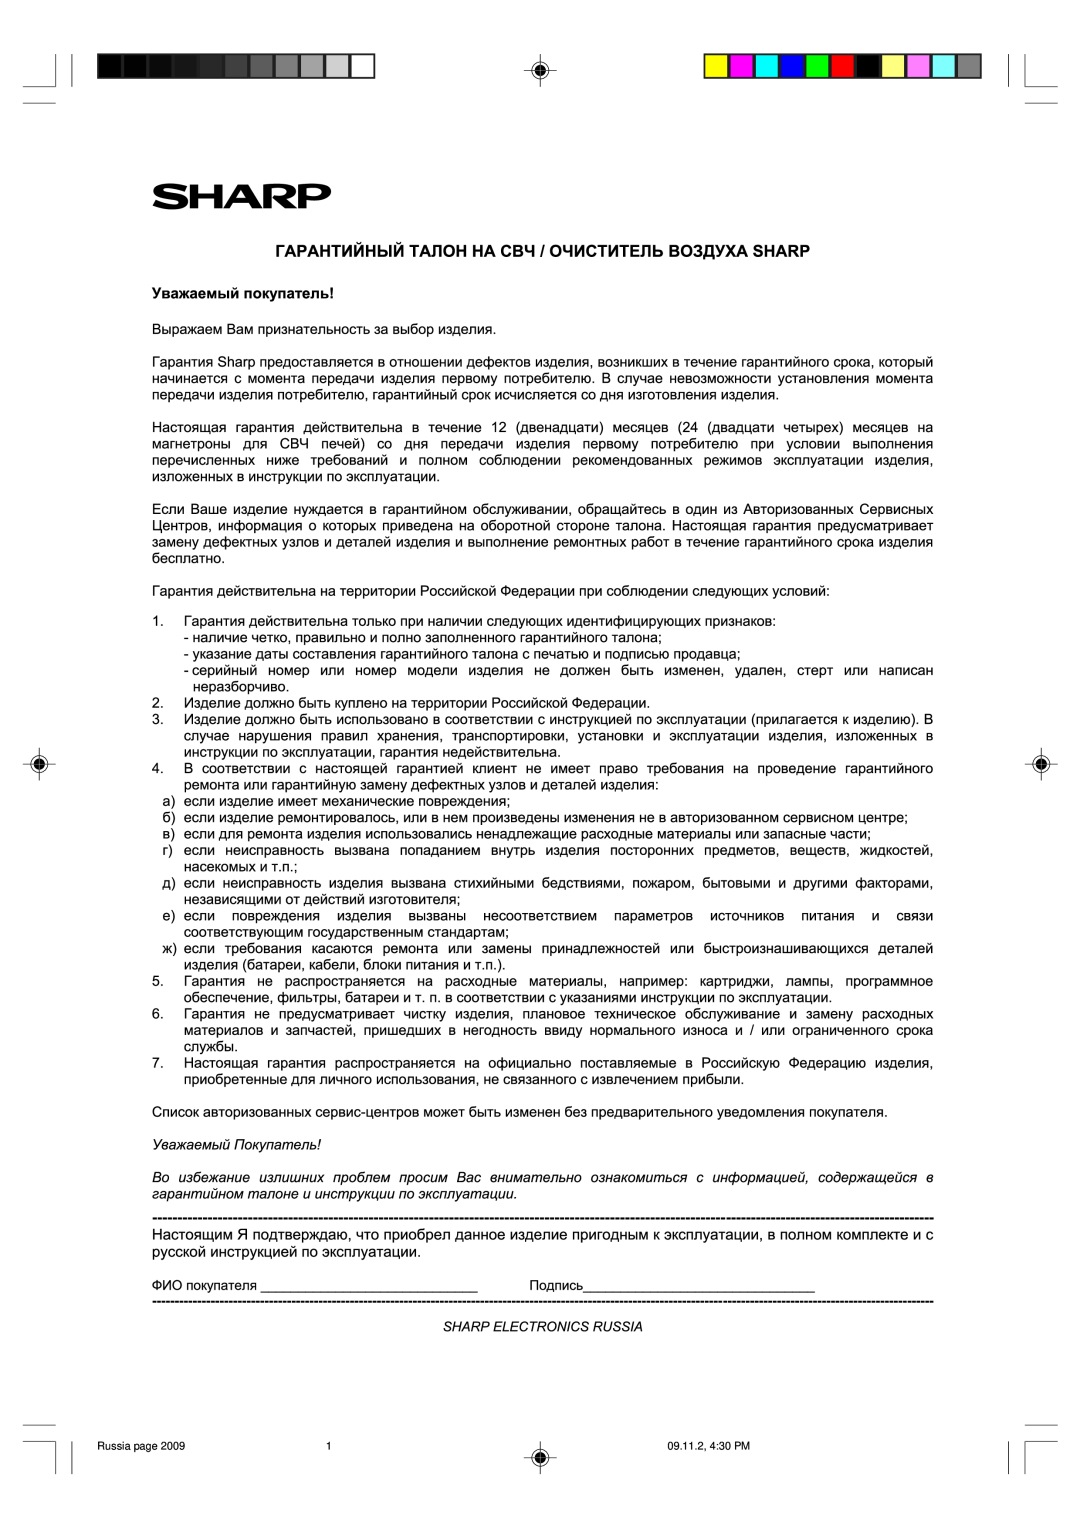 Sharp R-297F operation manual Russia page, 09.11.2, 430 PM 